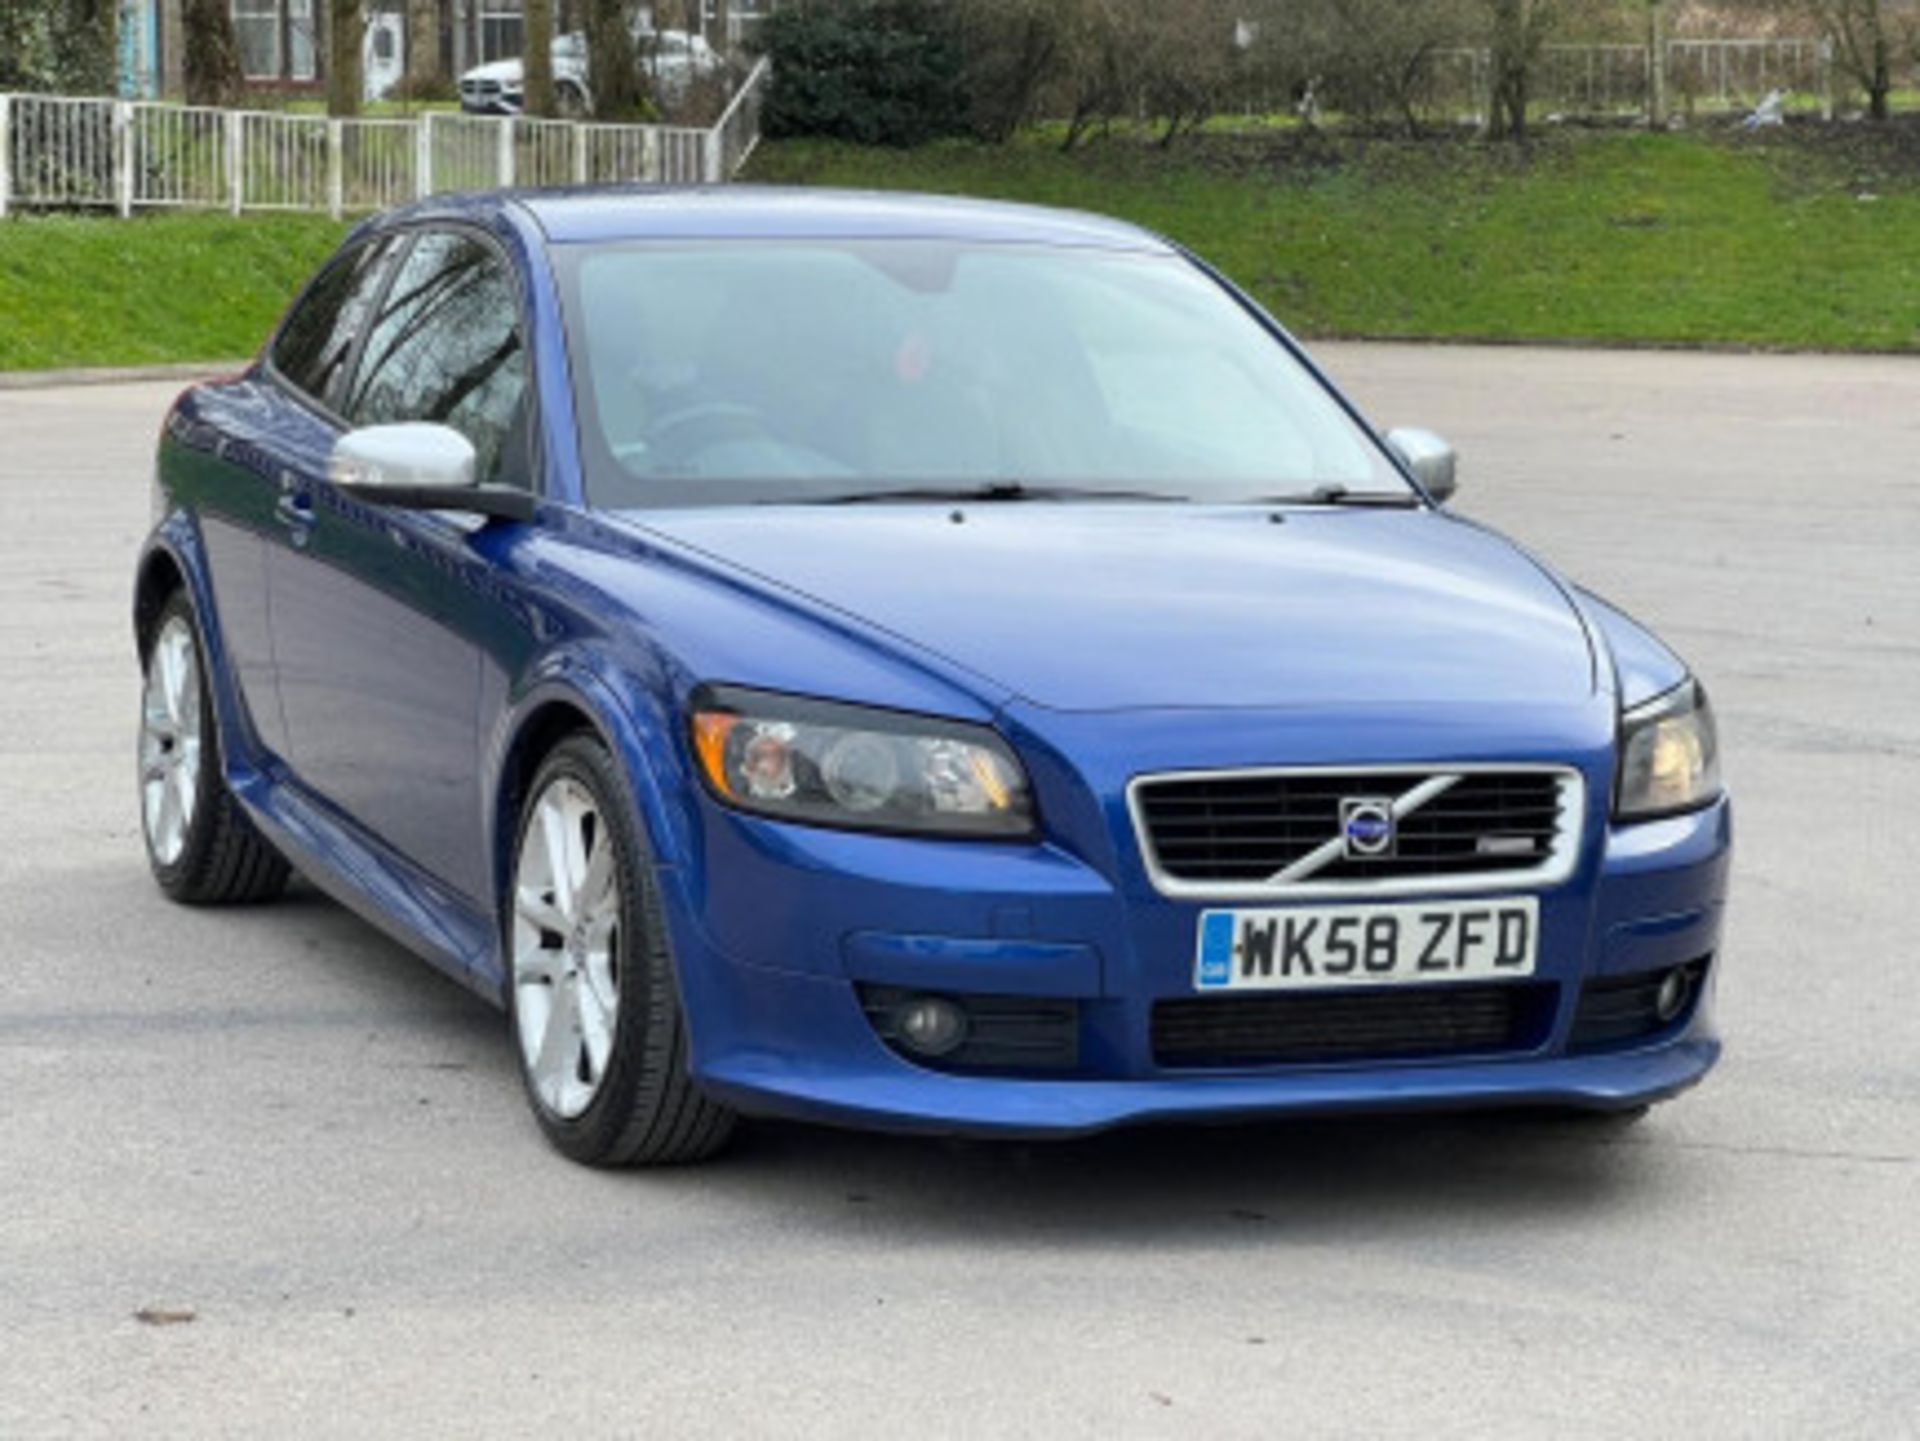 VOLVO C30 2.0D R-DESIGN SPORT 2DR - SPORTY AND LUXURIOUS COMPACT CAR >>--NO VAT ON HAMMER--<< - Image 41 of 103